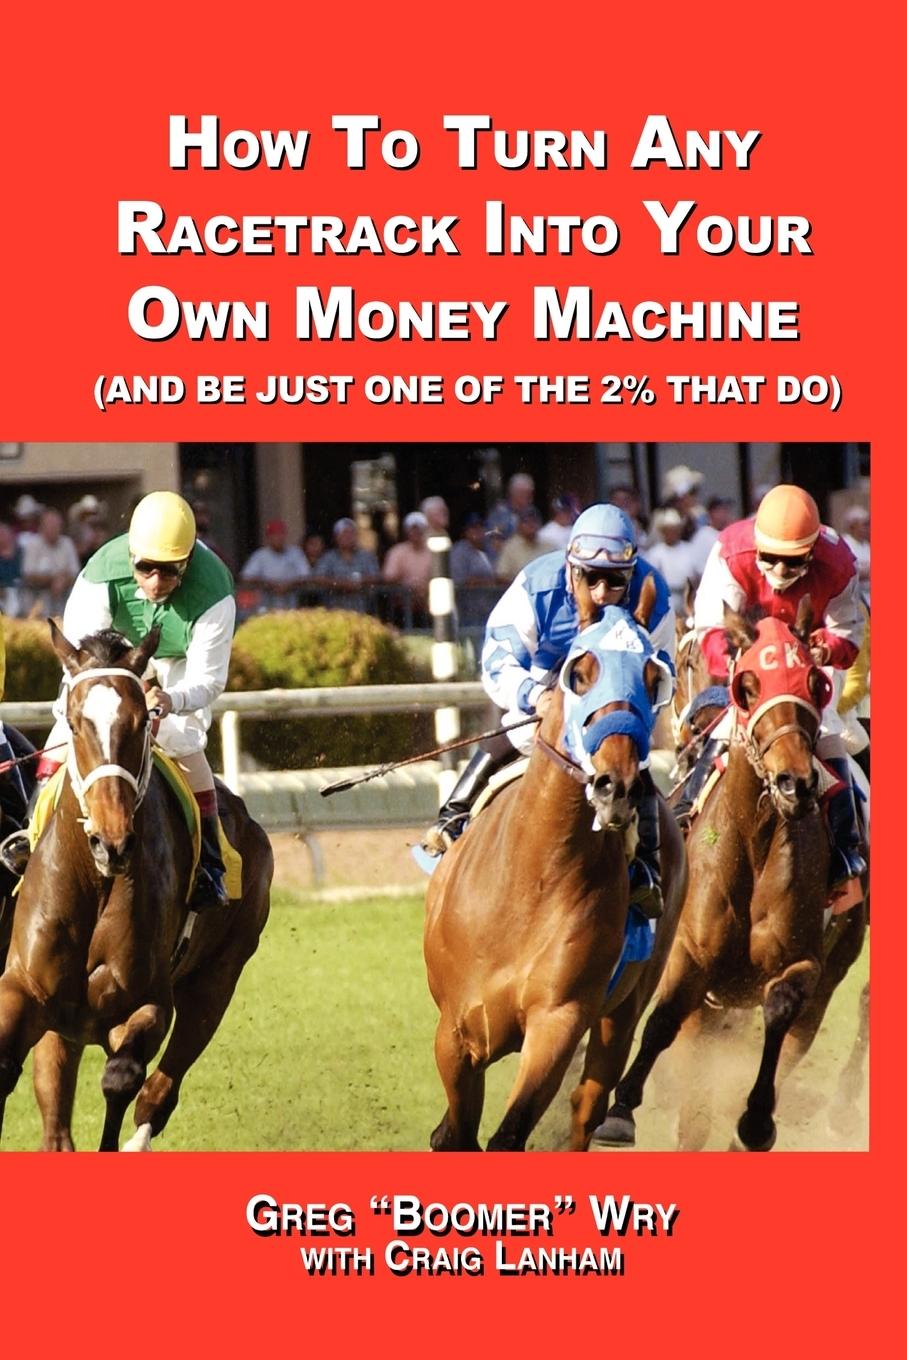 How to Turn a Racetrack Into Your Own Private Money Machine (and Be Just One of the 2% That Do) - Wry, Greg  Boomer